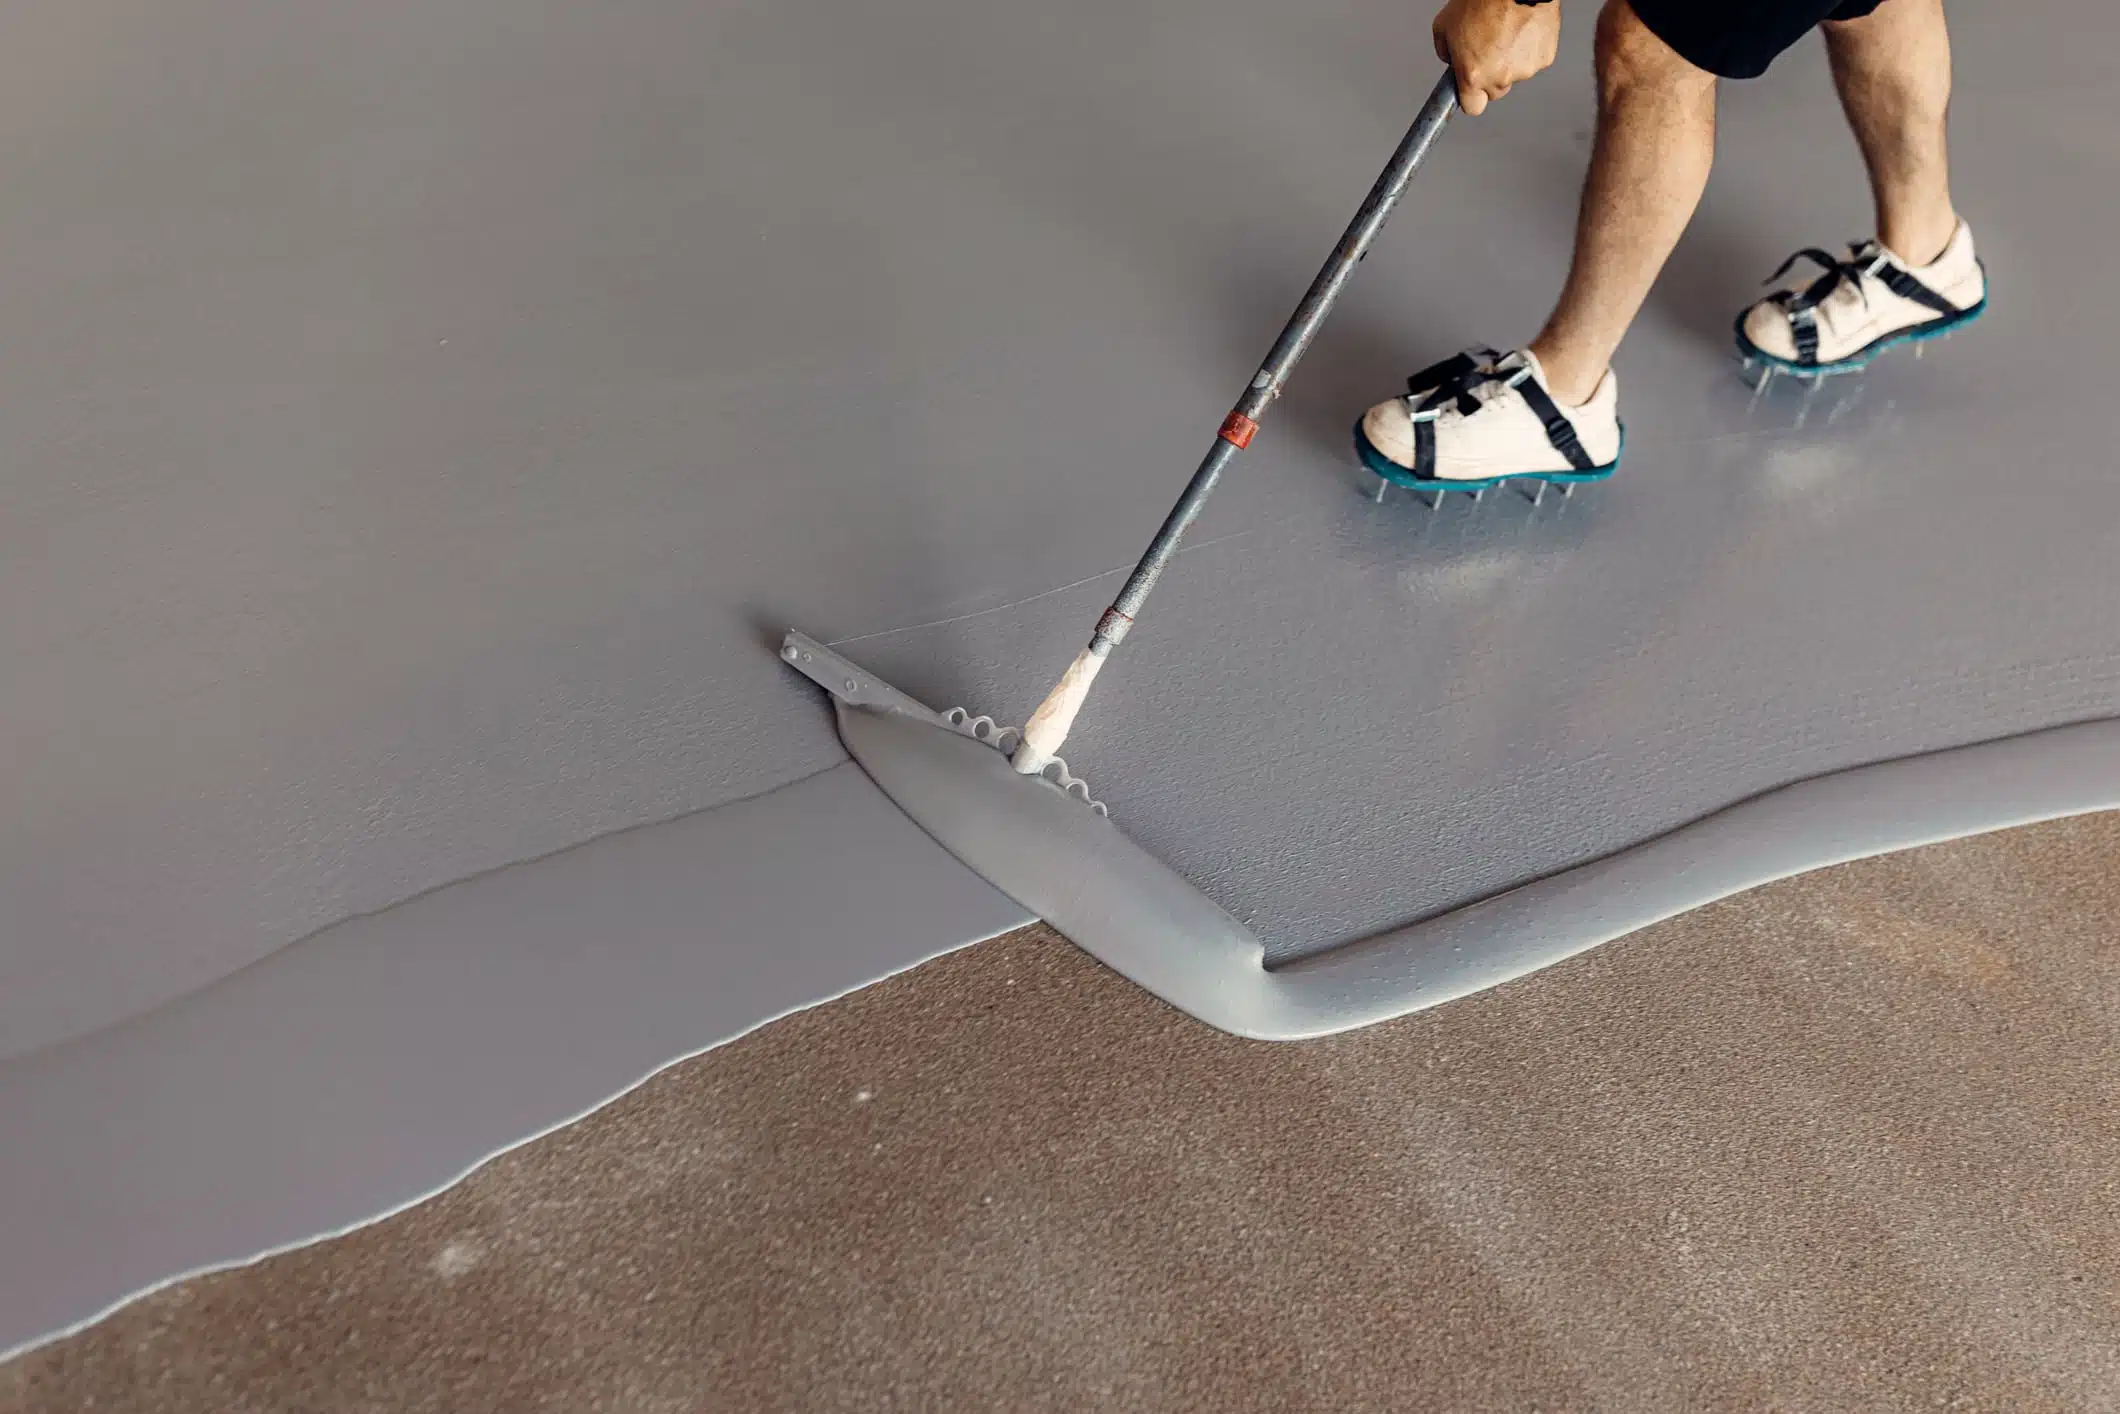 Grey Floor coating by Slip No More being rolled onto a floor by a man with spikes on shoes